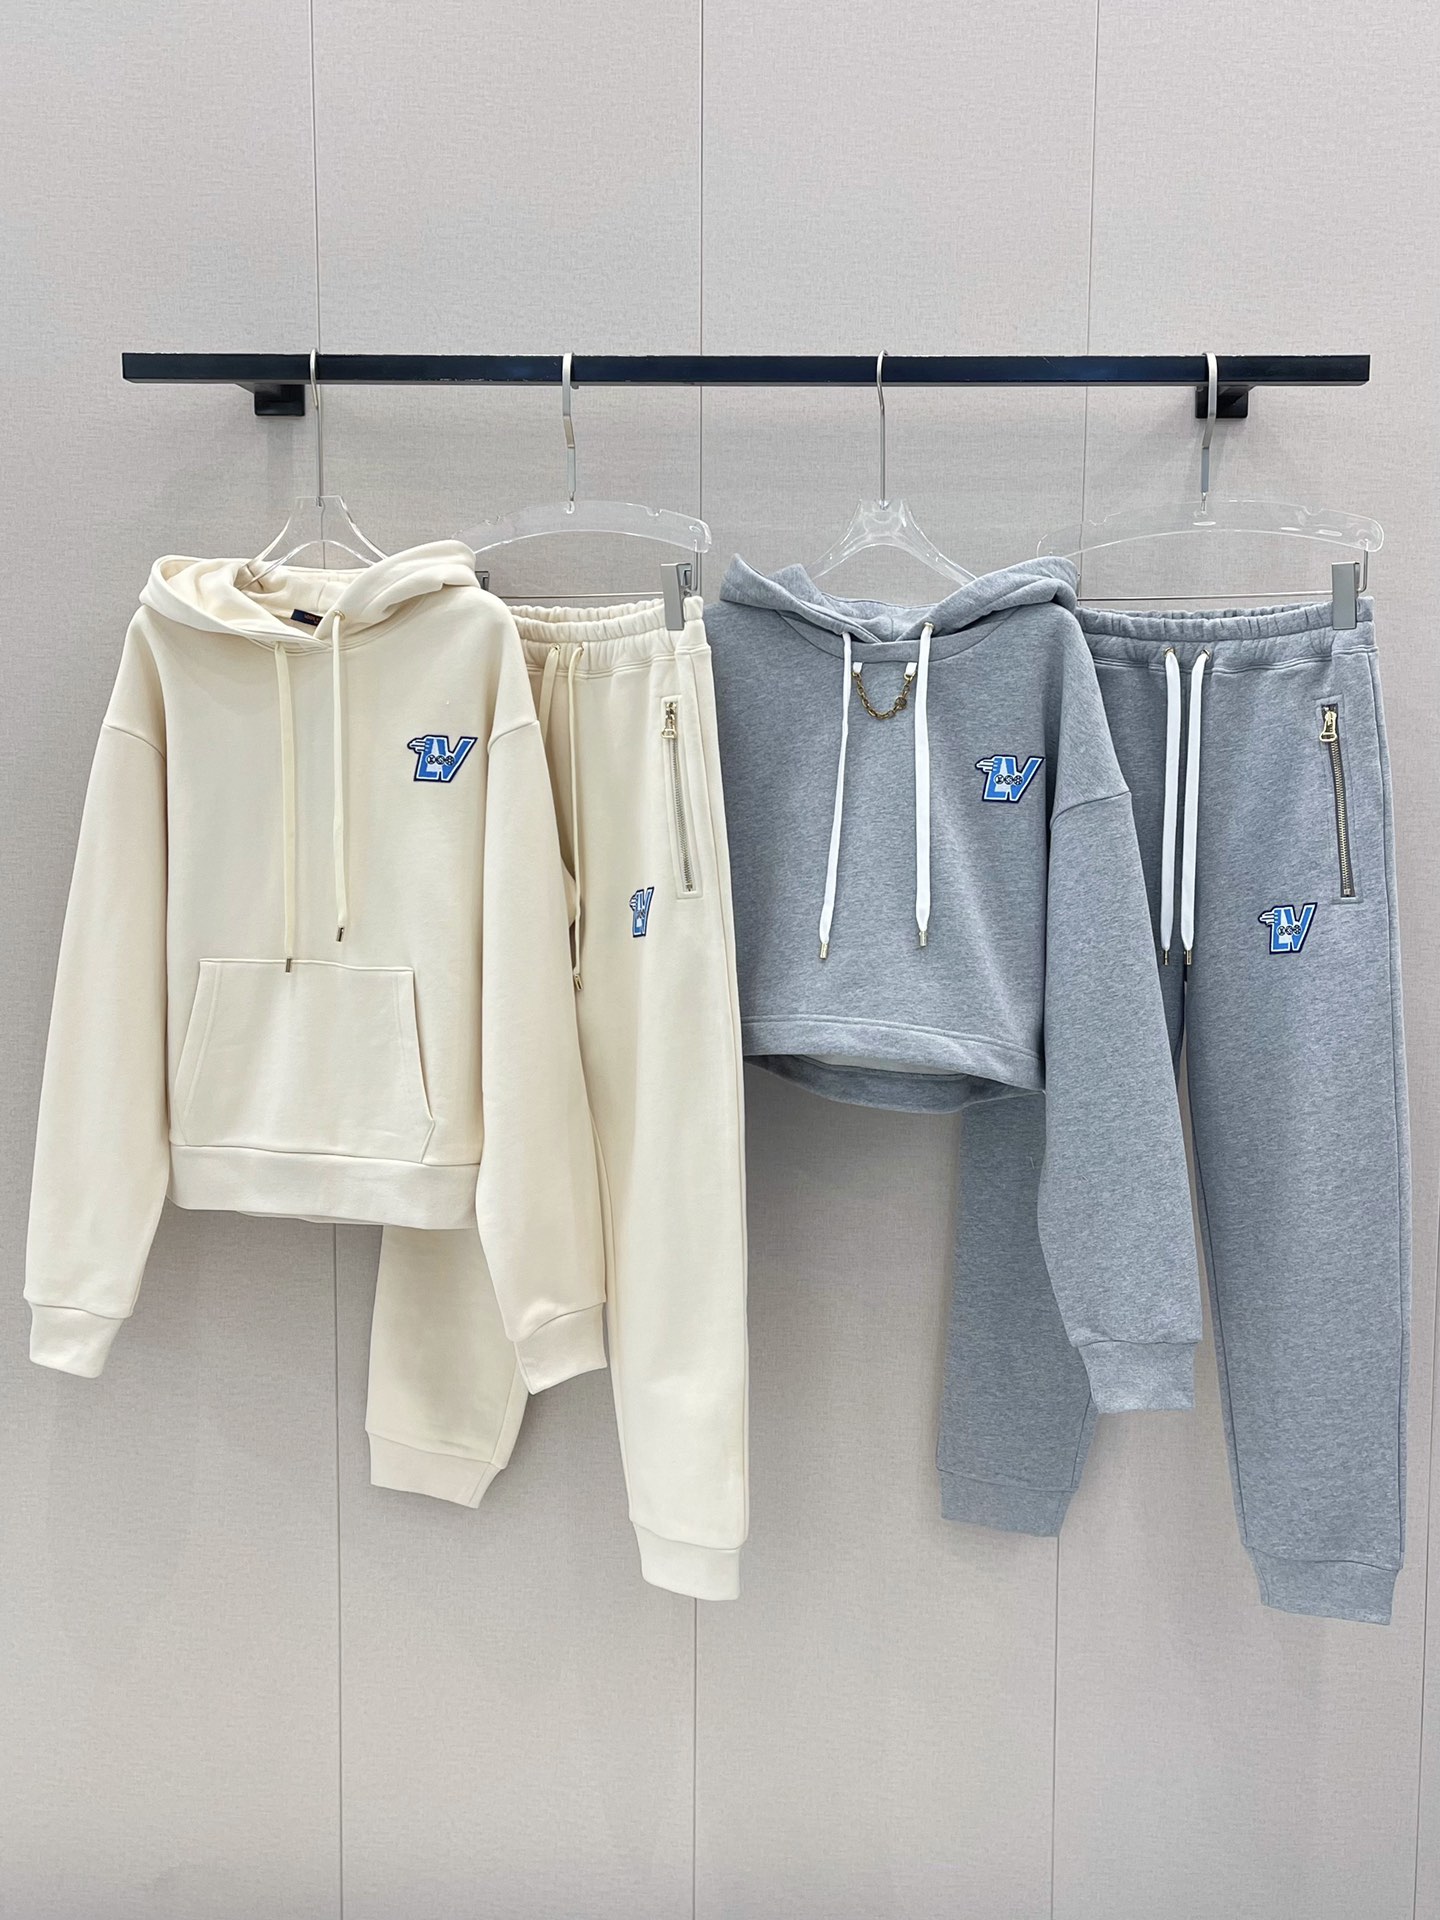 Louis Vuitton Clothing Pants & Trousers Two Piece Outfits & Matching Sets Supplier in China
 Apricot Color Grey Yellow Embroidery Cotton Knitting Fall/Winter Collection Hooded Top